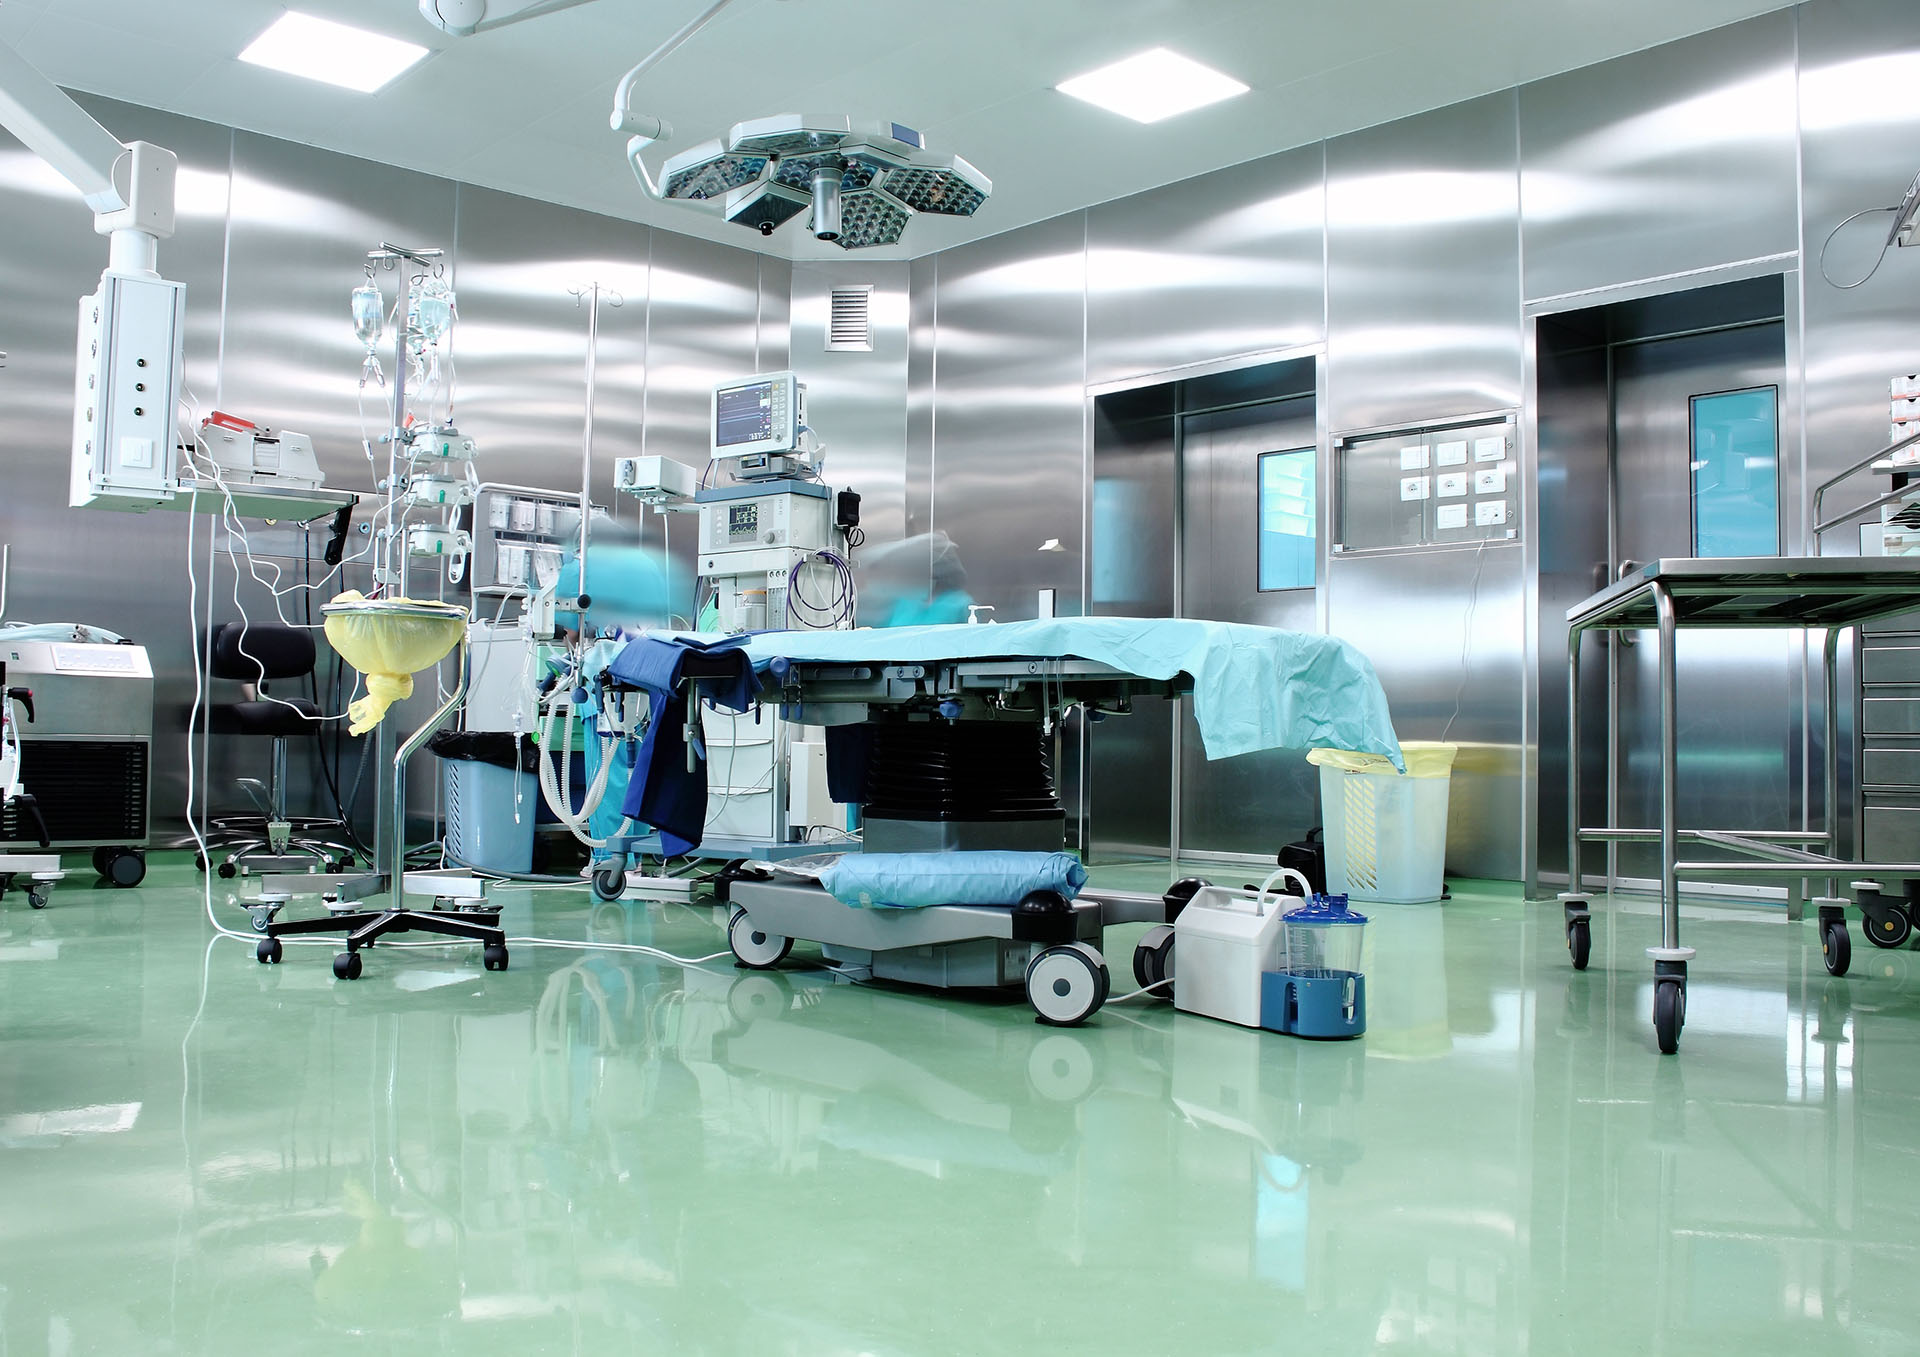 Medical Surgical Room